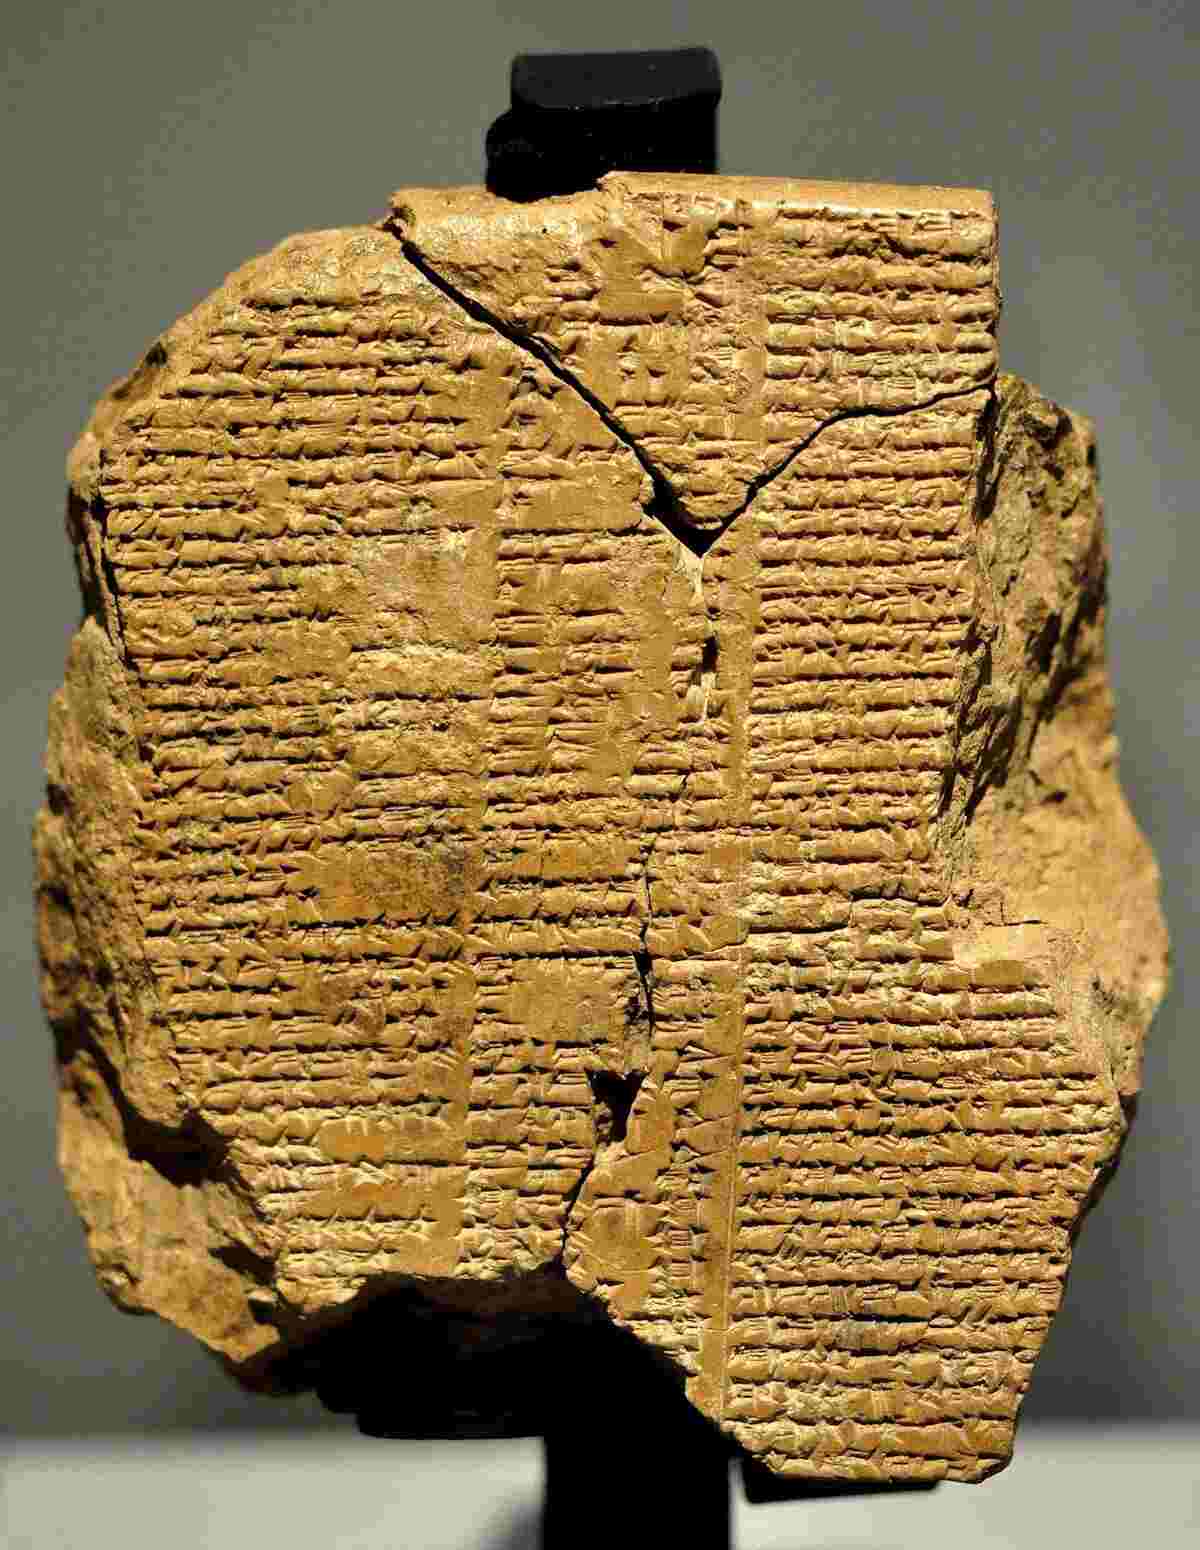 Tablet from the Epic of Gilgamesh